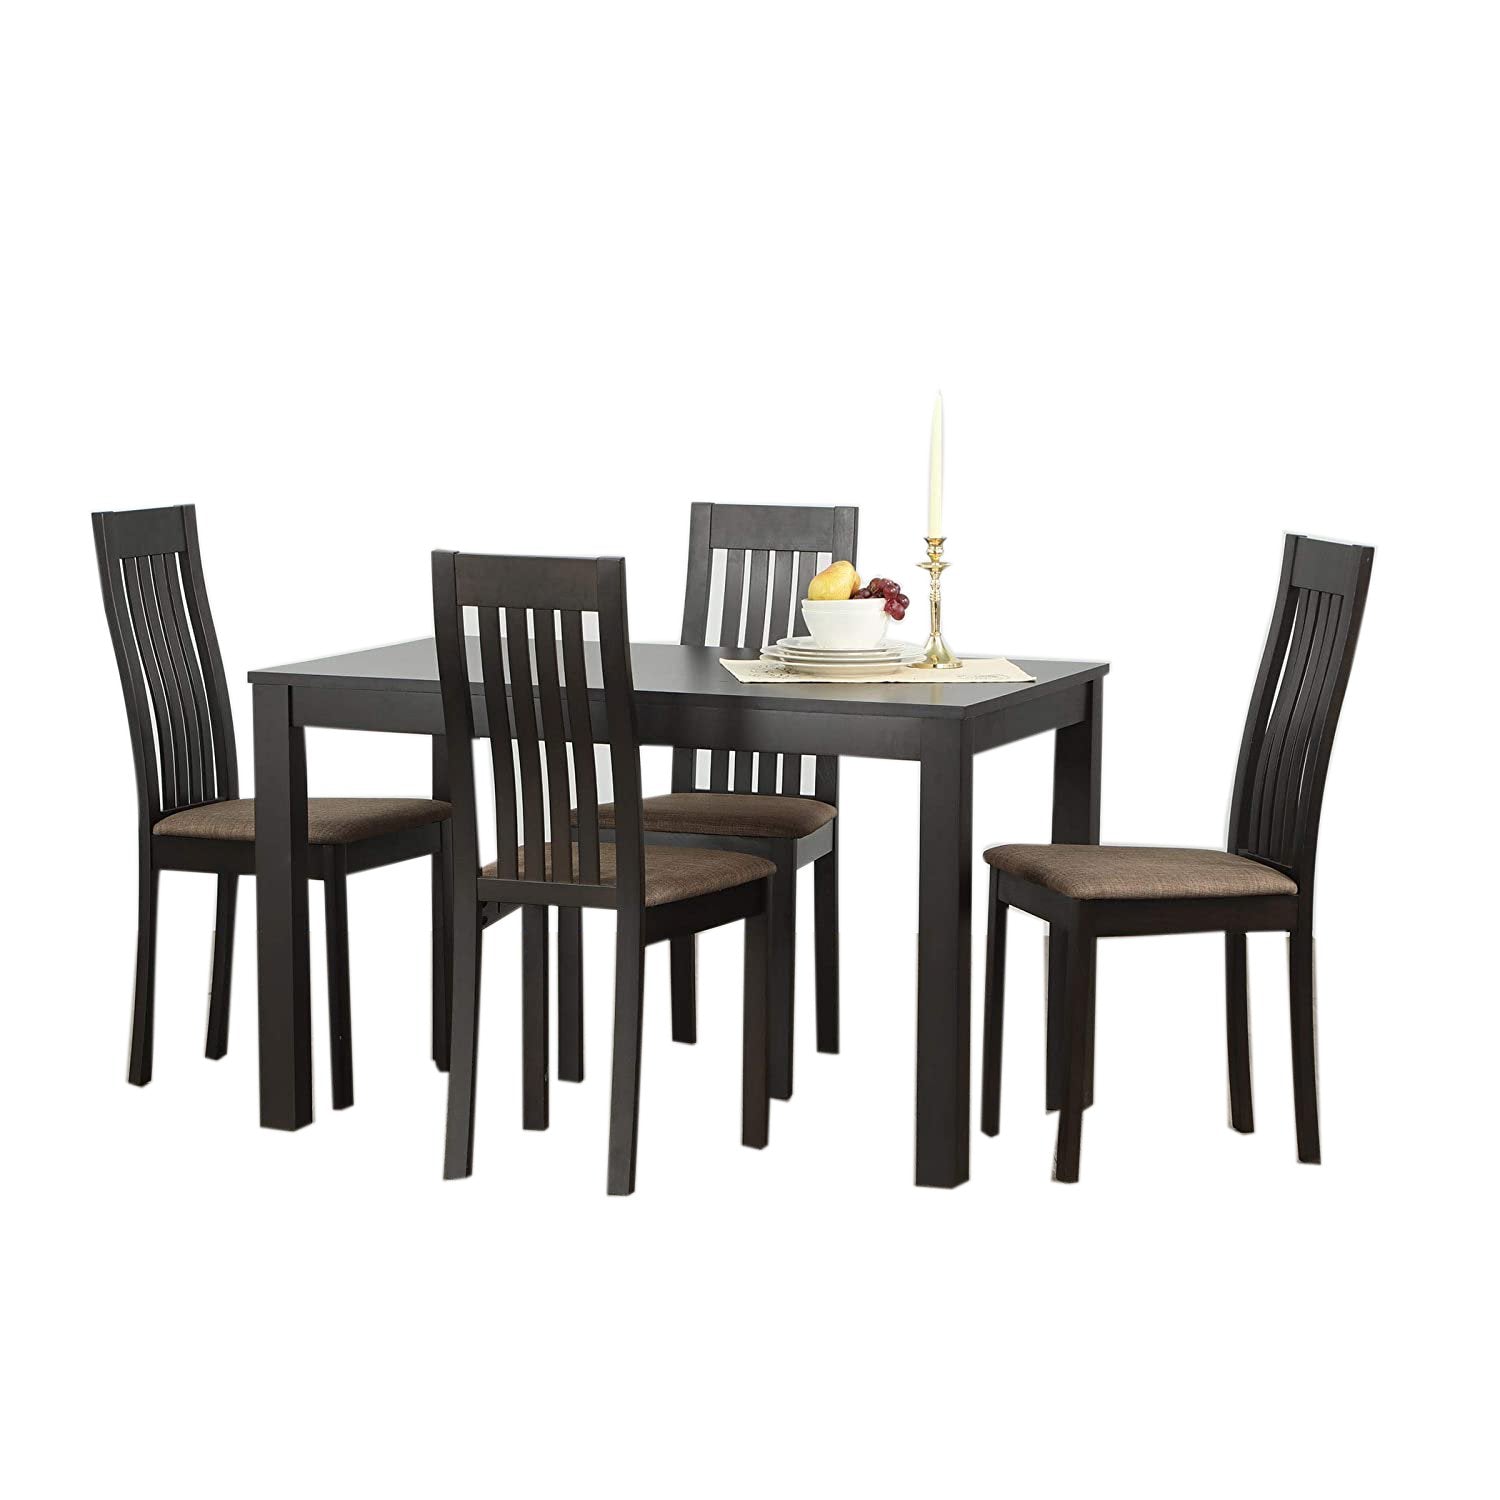 Marshall 4 Seater Dining Table with 4 Chairs & 1 Table (Beige Walnut Finish) - Torque India